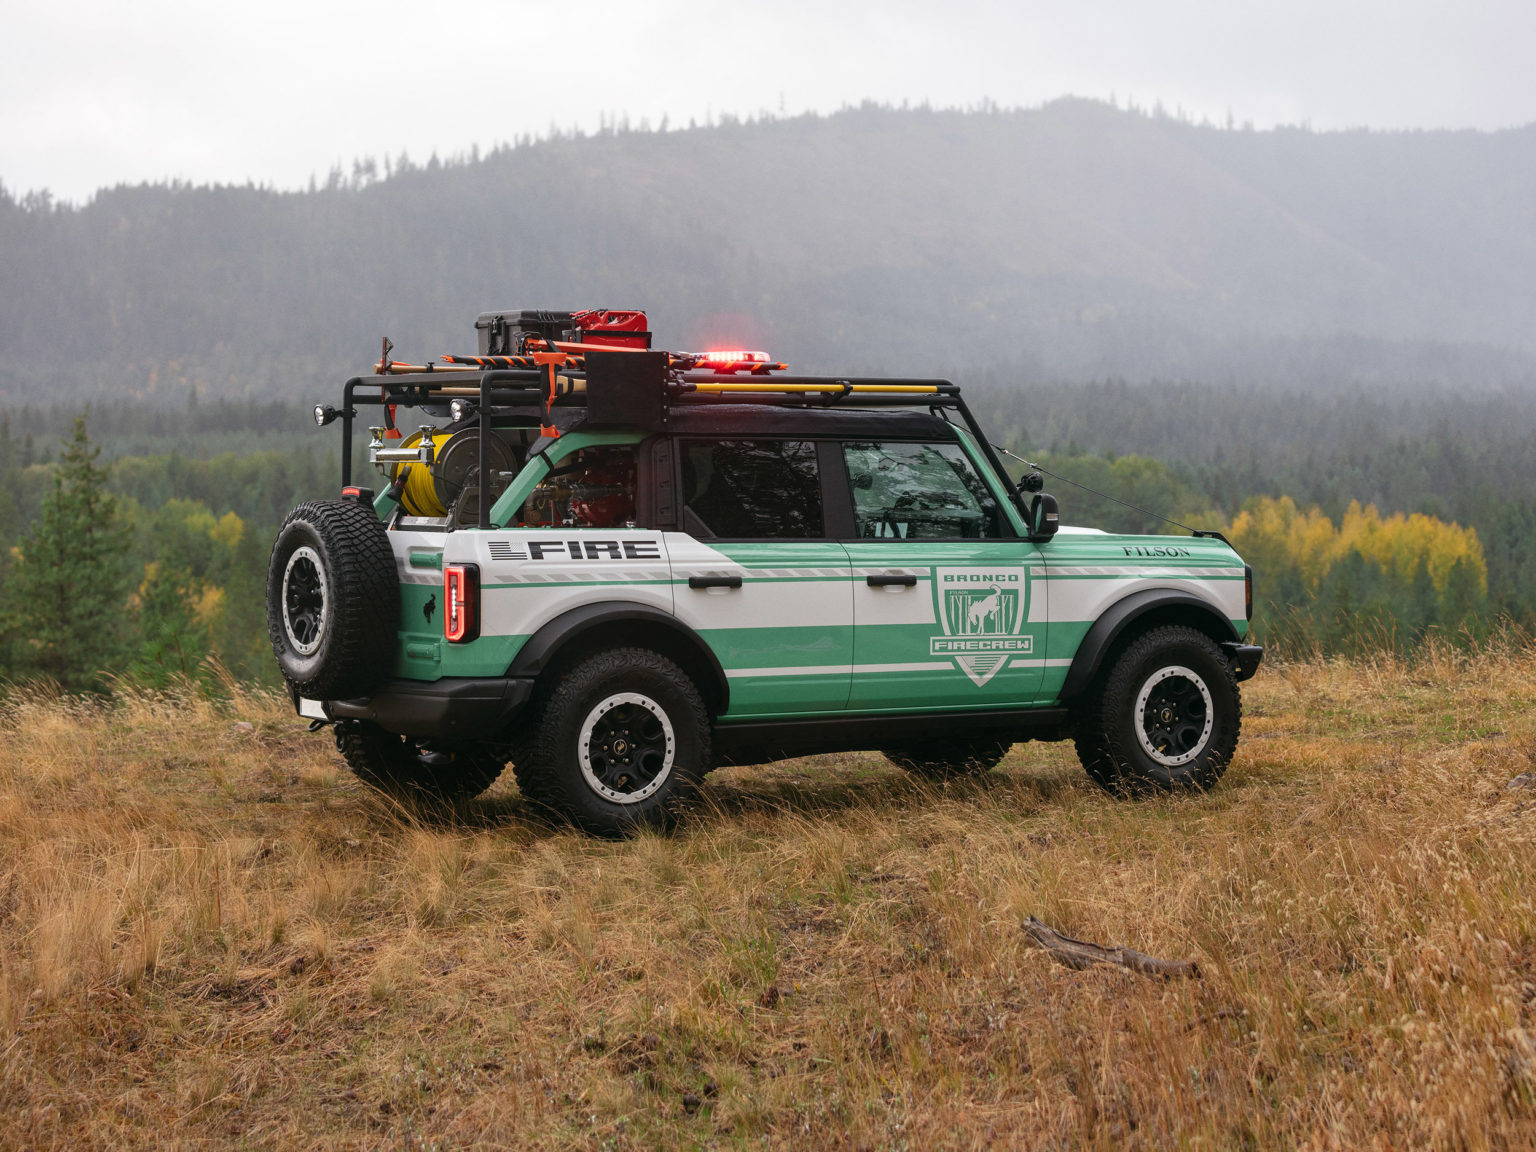 Ford's latest concept vehicle is designed to better-equip firefighters for the tough tasks ahead.